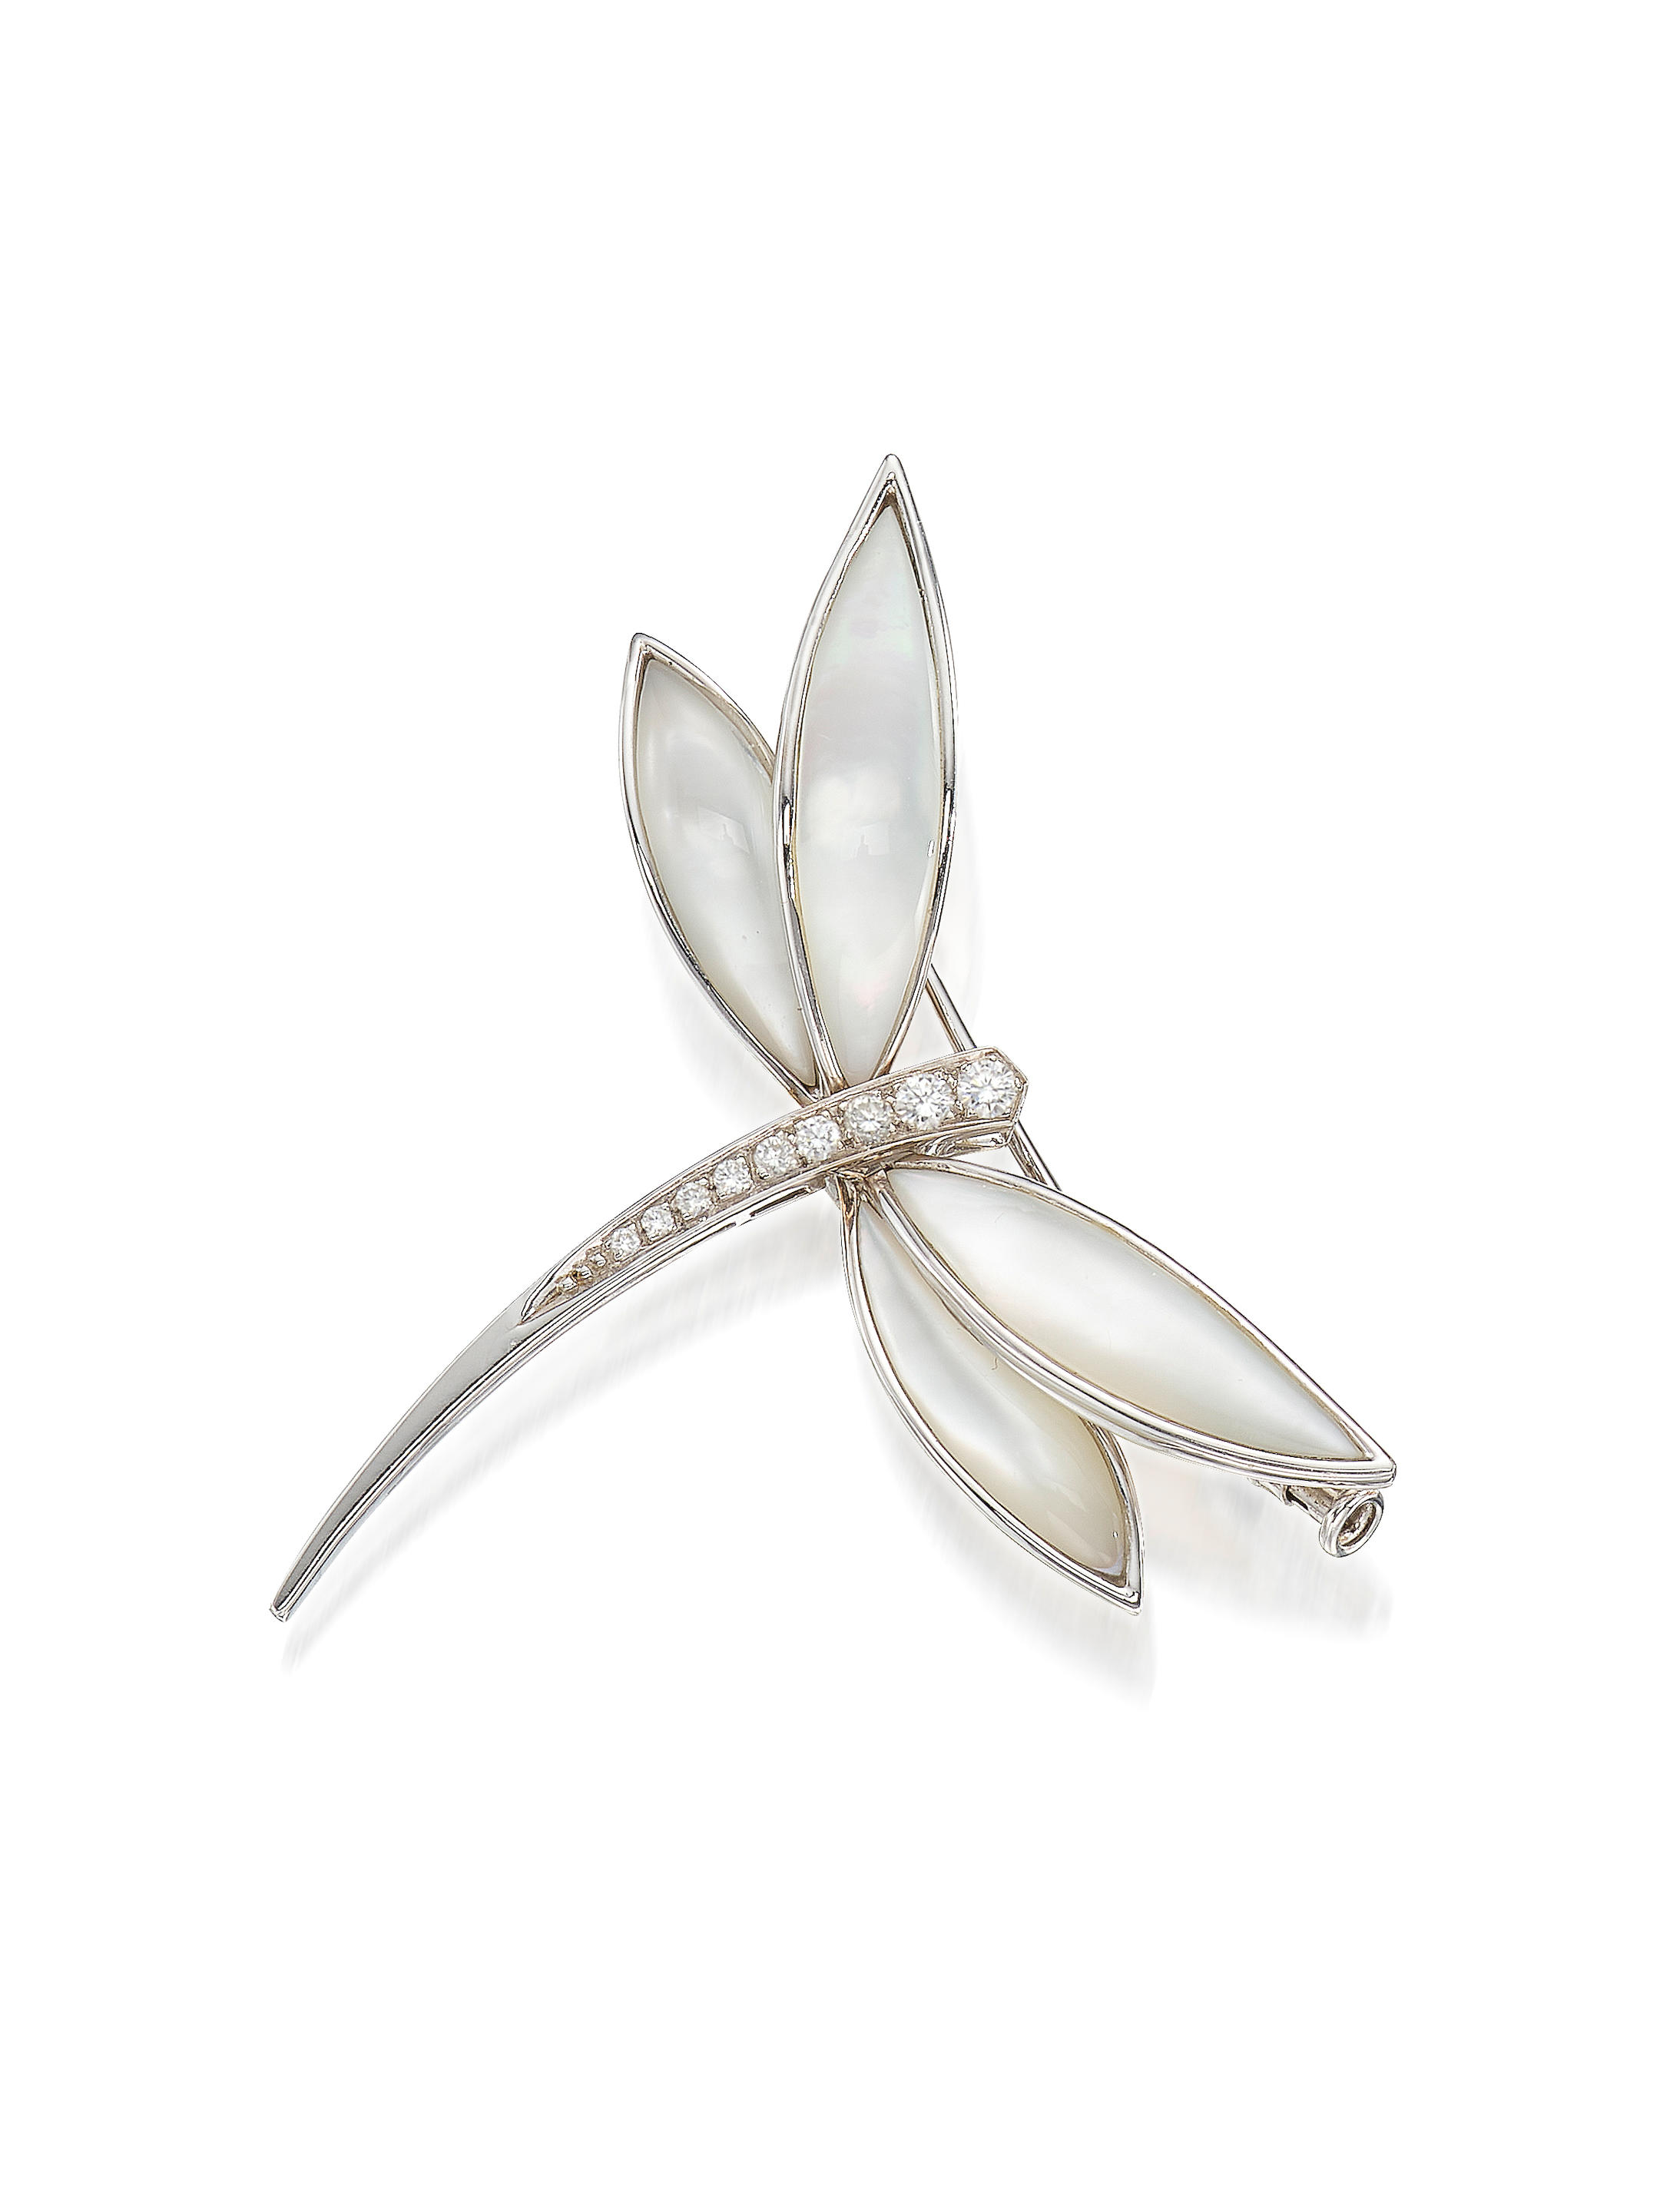 Sold at Auction: Van Cleef & Arpels Gold and Mother-of-Pearl